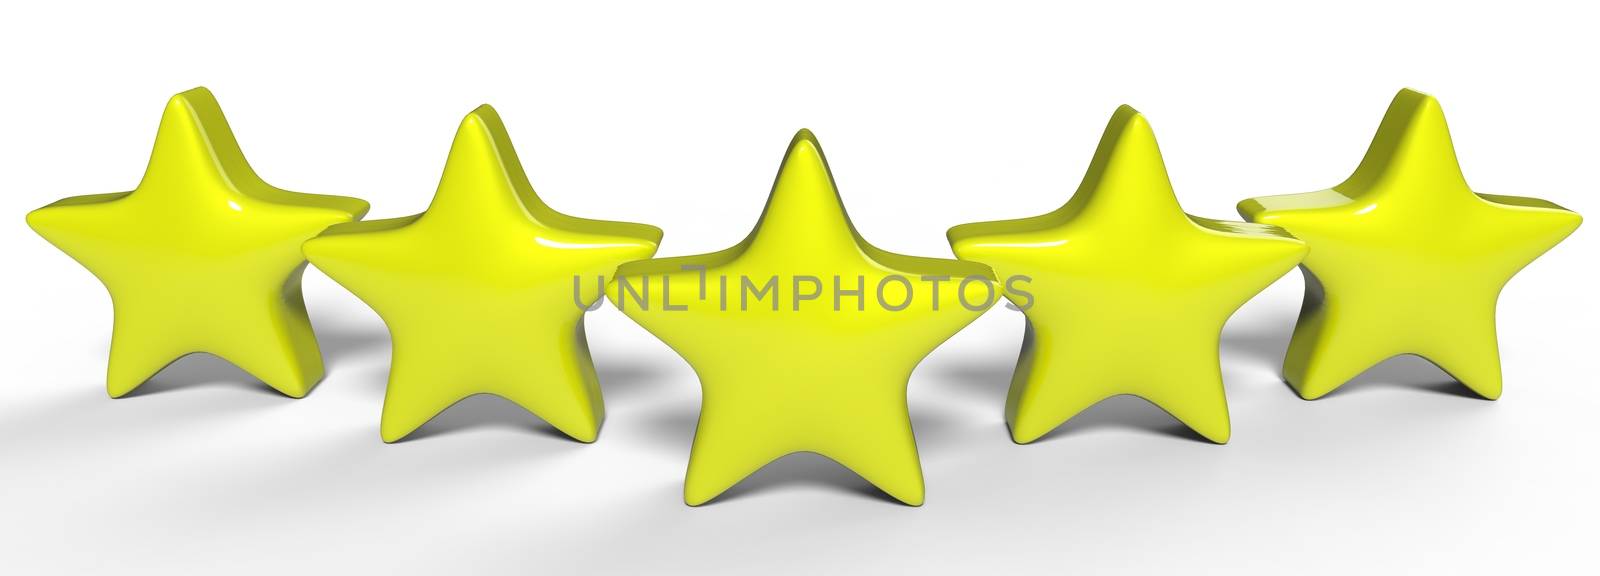 3d five yellow star on color background. Render and illustration of golden star for premium review by Andreajk3